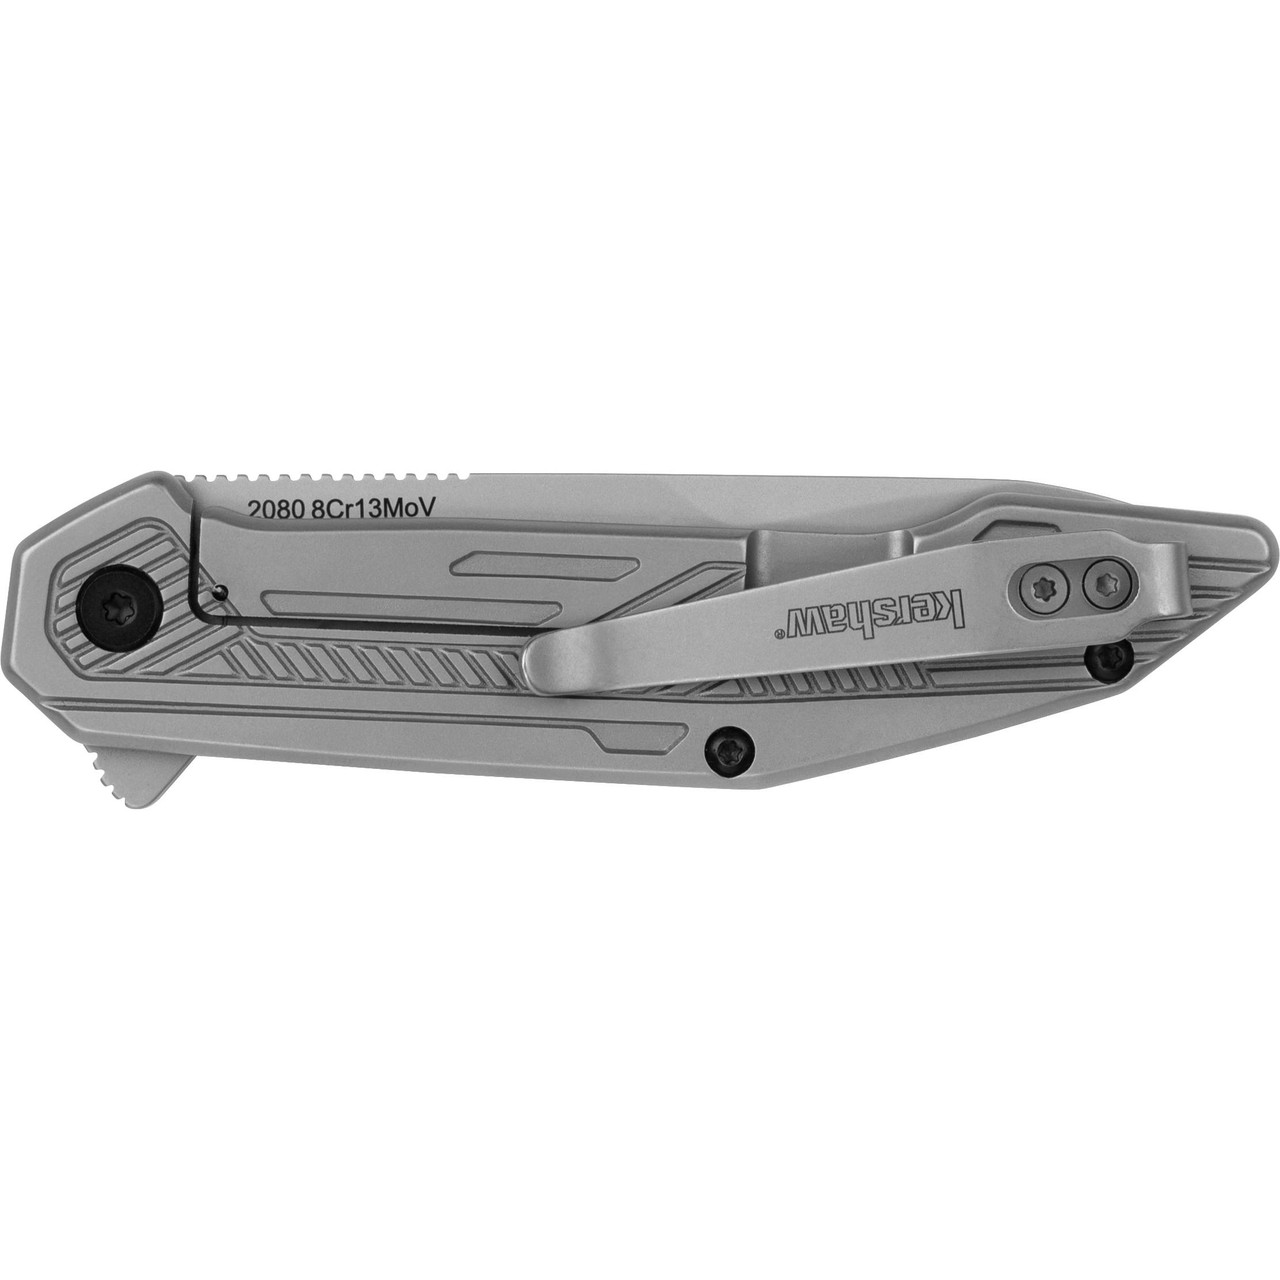  Kershaw Cryo Knife, 2.75 Stainless Steel Drop Point